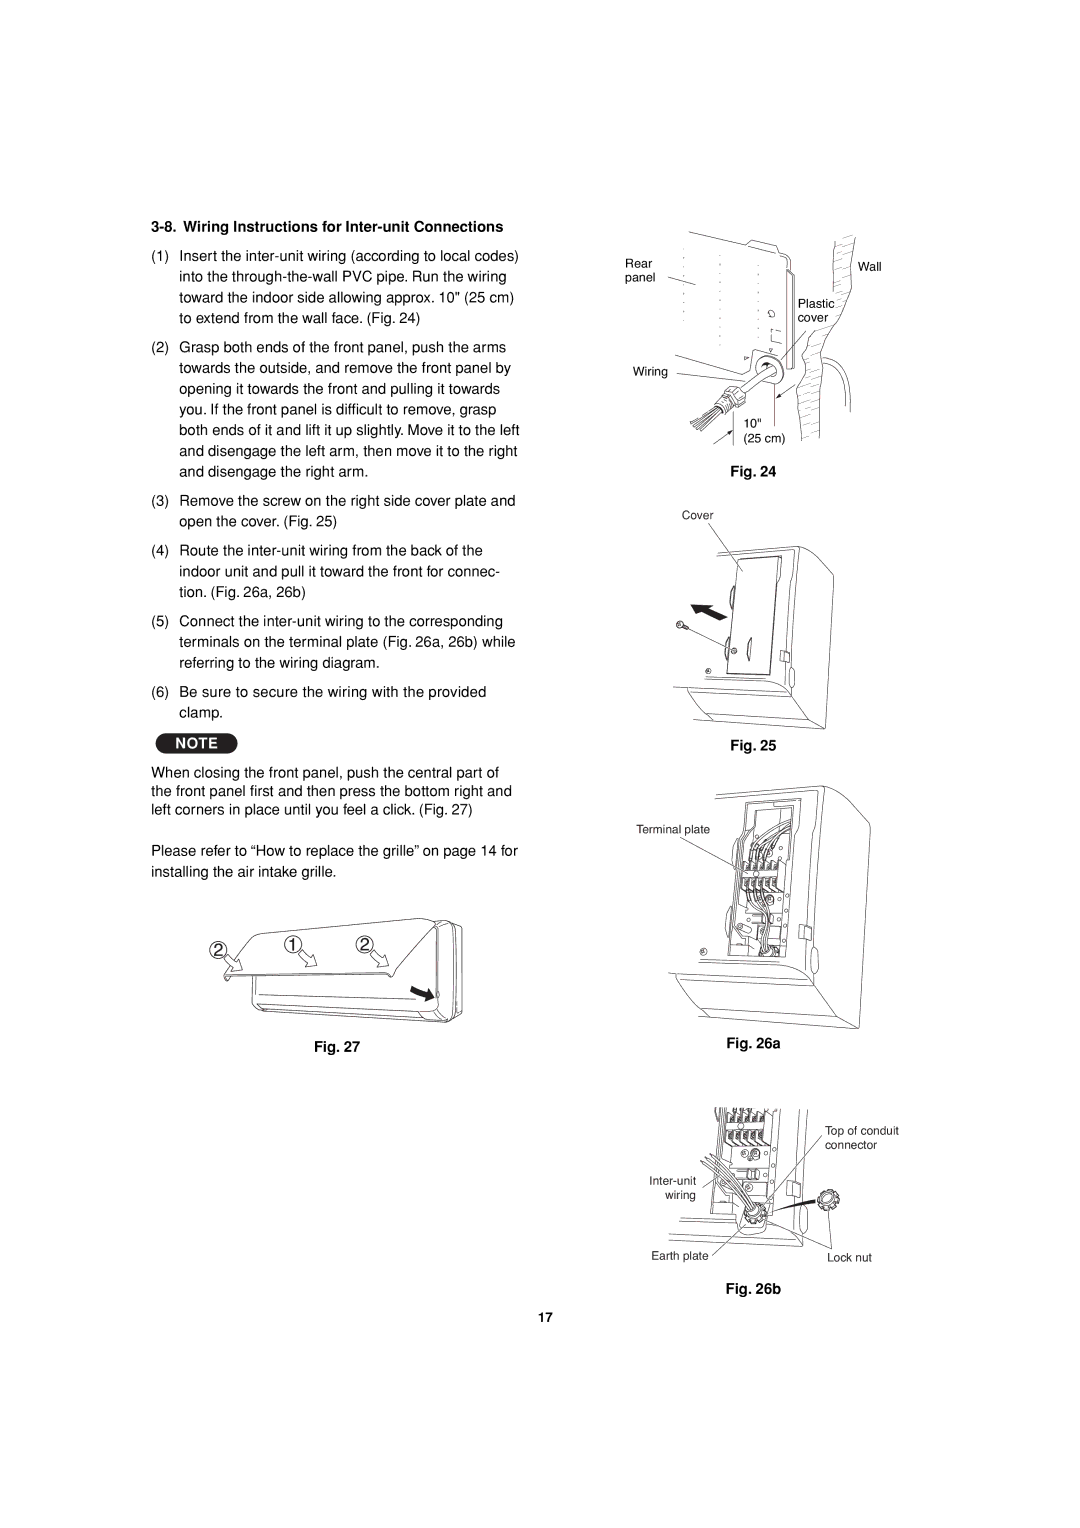 Sanyo KHS3082 + CH3082, KHS3682 + CH3682 service manual Wiring Instructions for Inter-unit Connections 